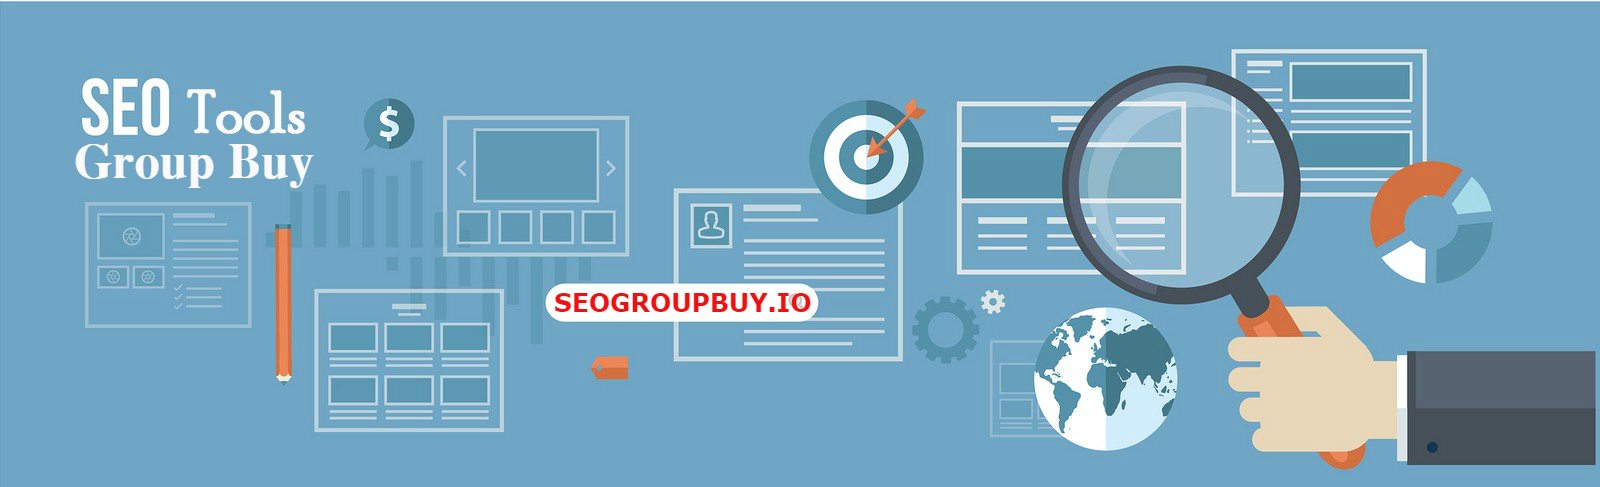 SEO Group Buy Tools Share 110+ SEO/SALE/SPY/PPC Tools at Cheapest